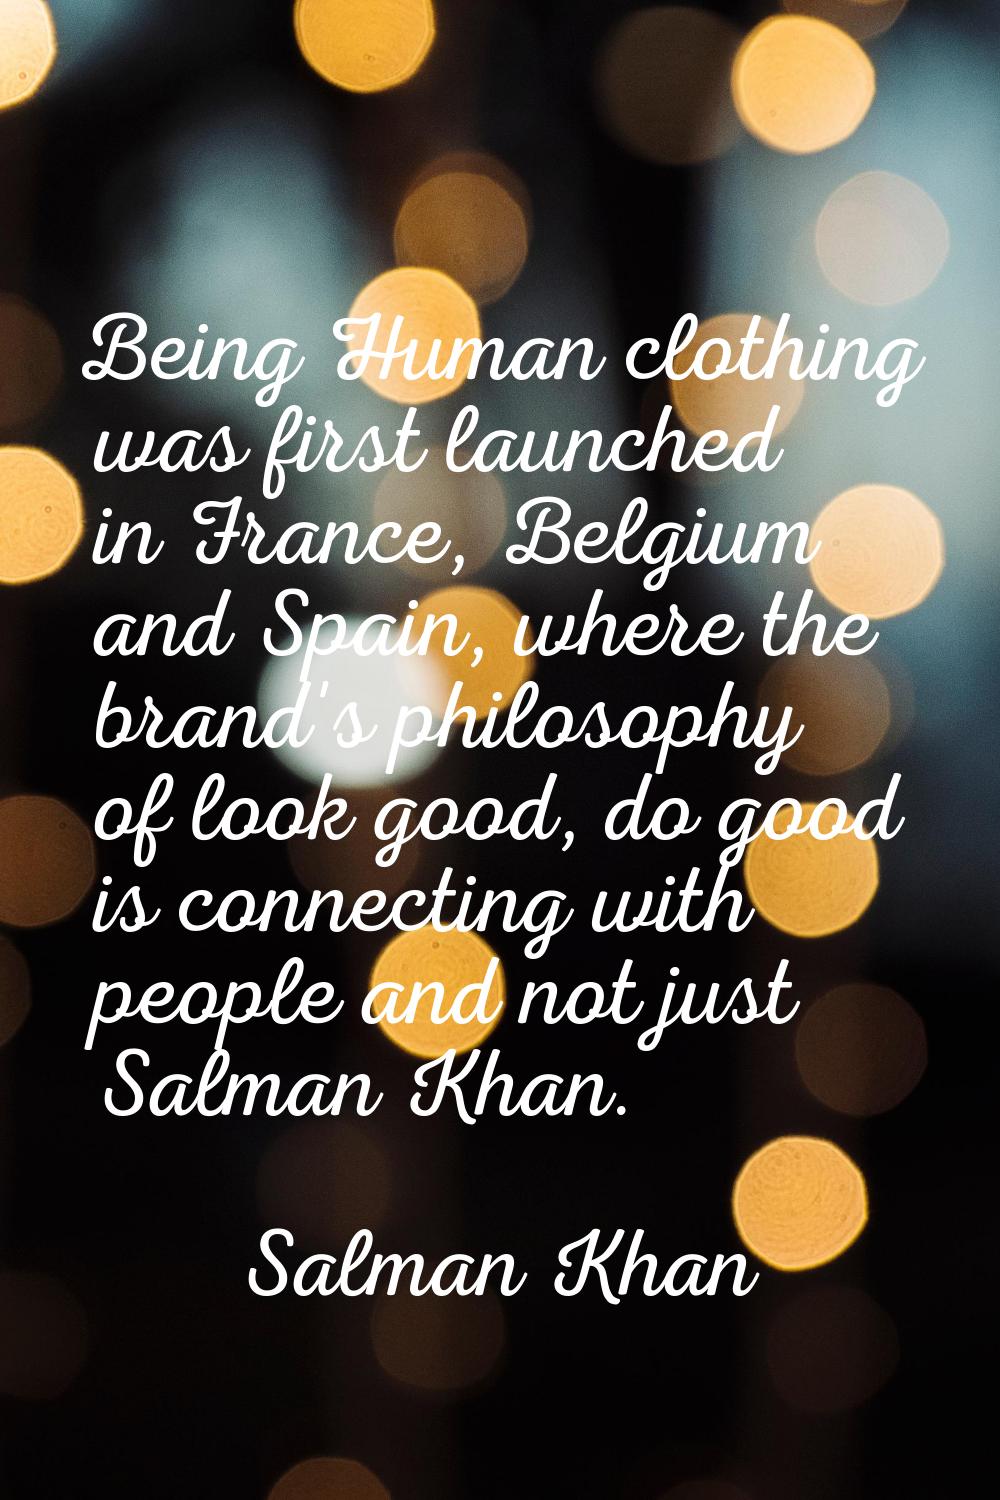 Being Human clothing was first launched in France, Belgium and Spain, where the brand's philosophy 